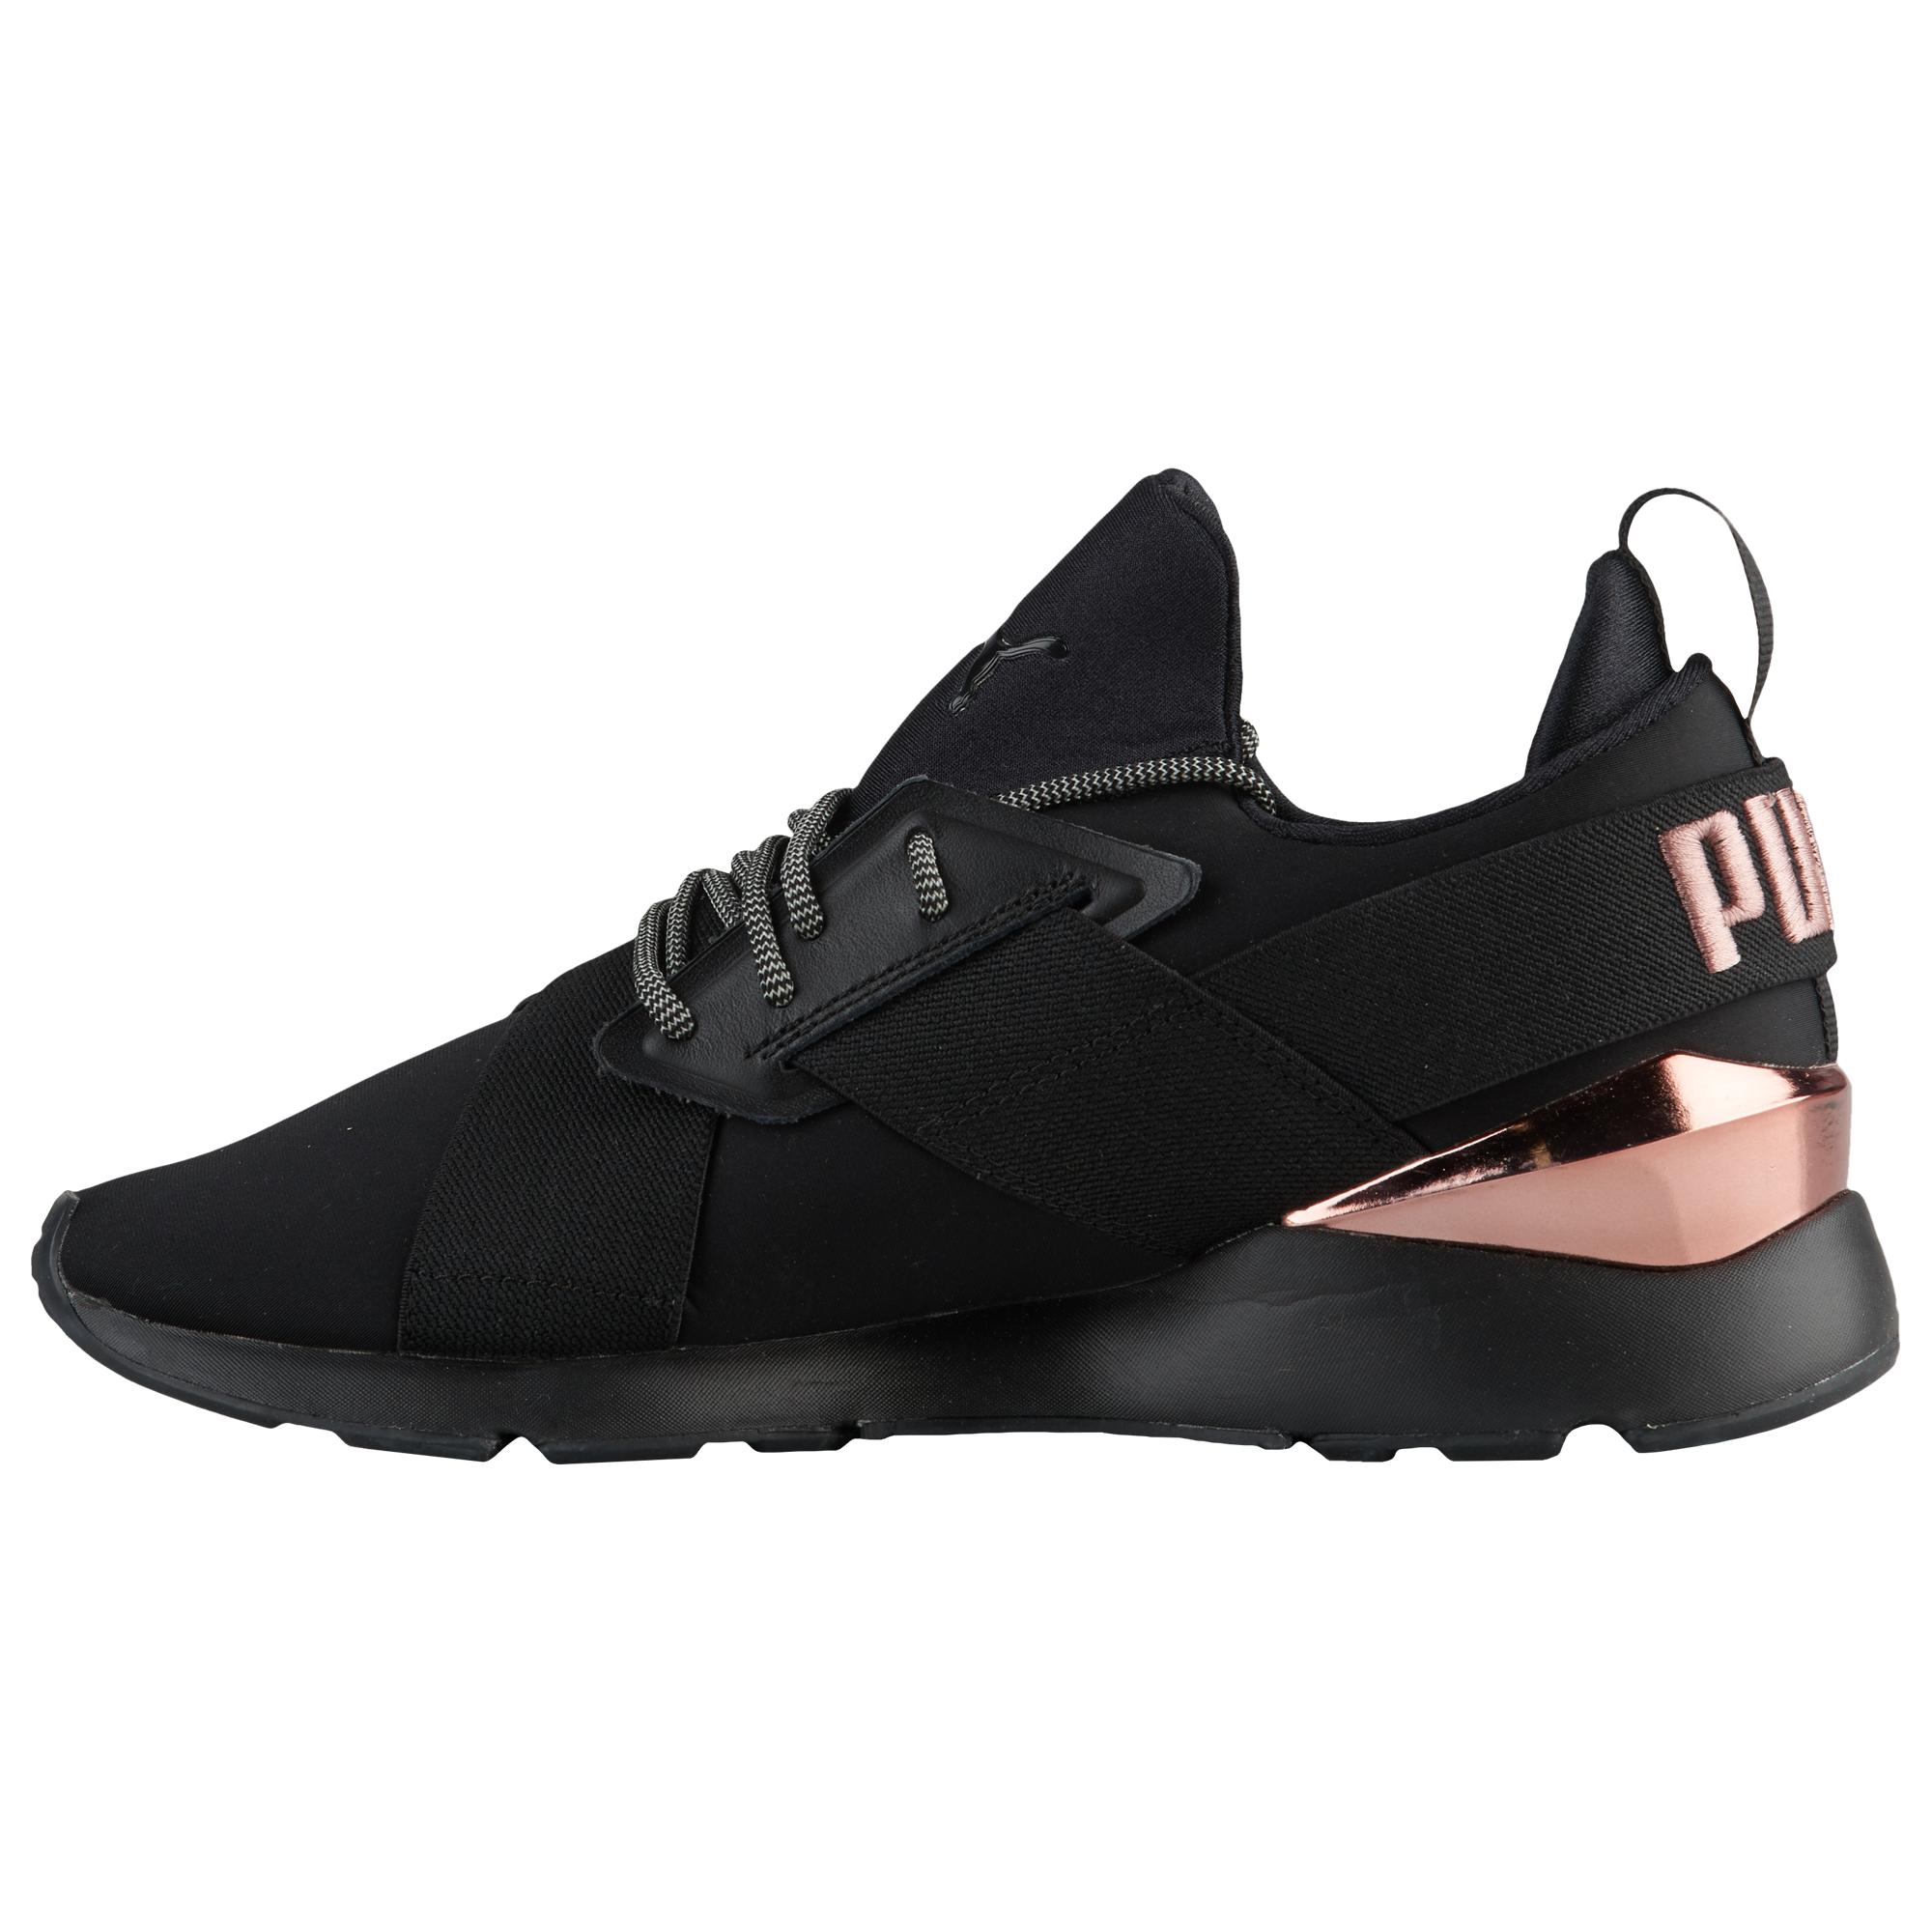 PUMA Rubber Muse Metal Running Shoes in Black/Rose Gold (Black) - Lyst